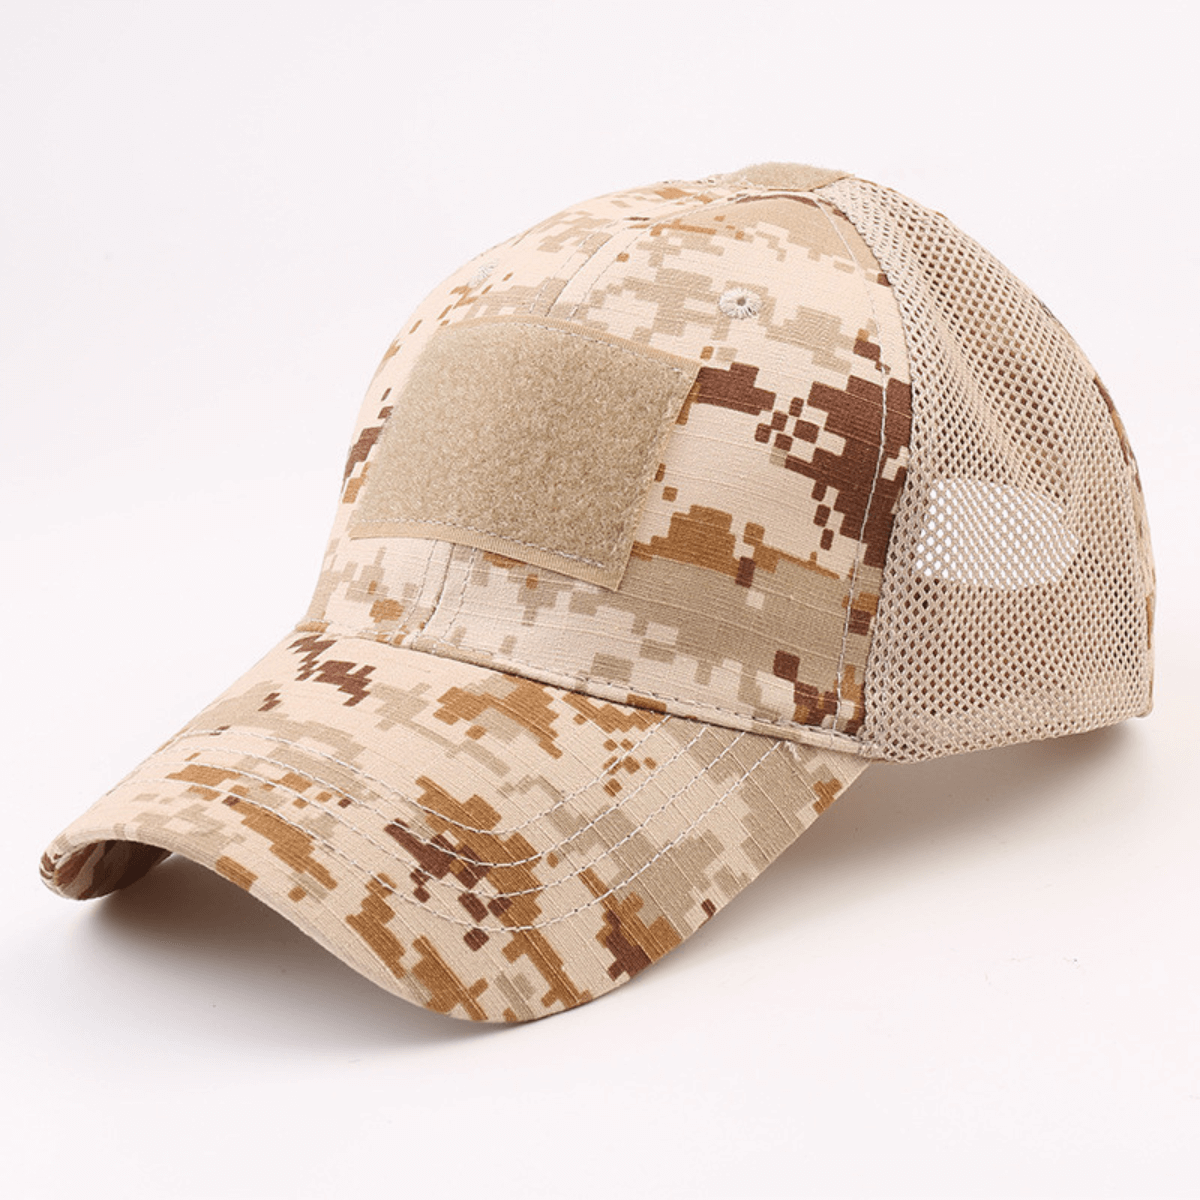 Military-Style Tactical Patch Hat – Urbanheer Strap with Adjustable